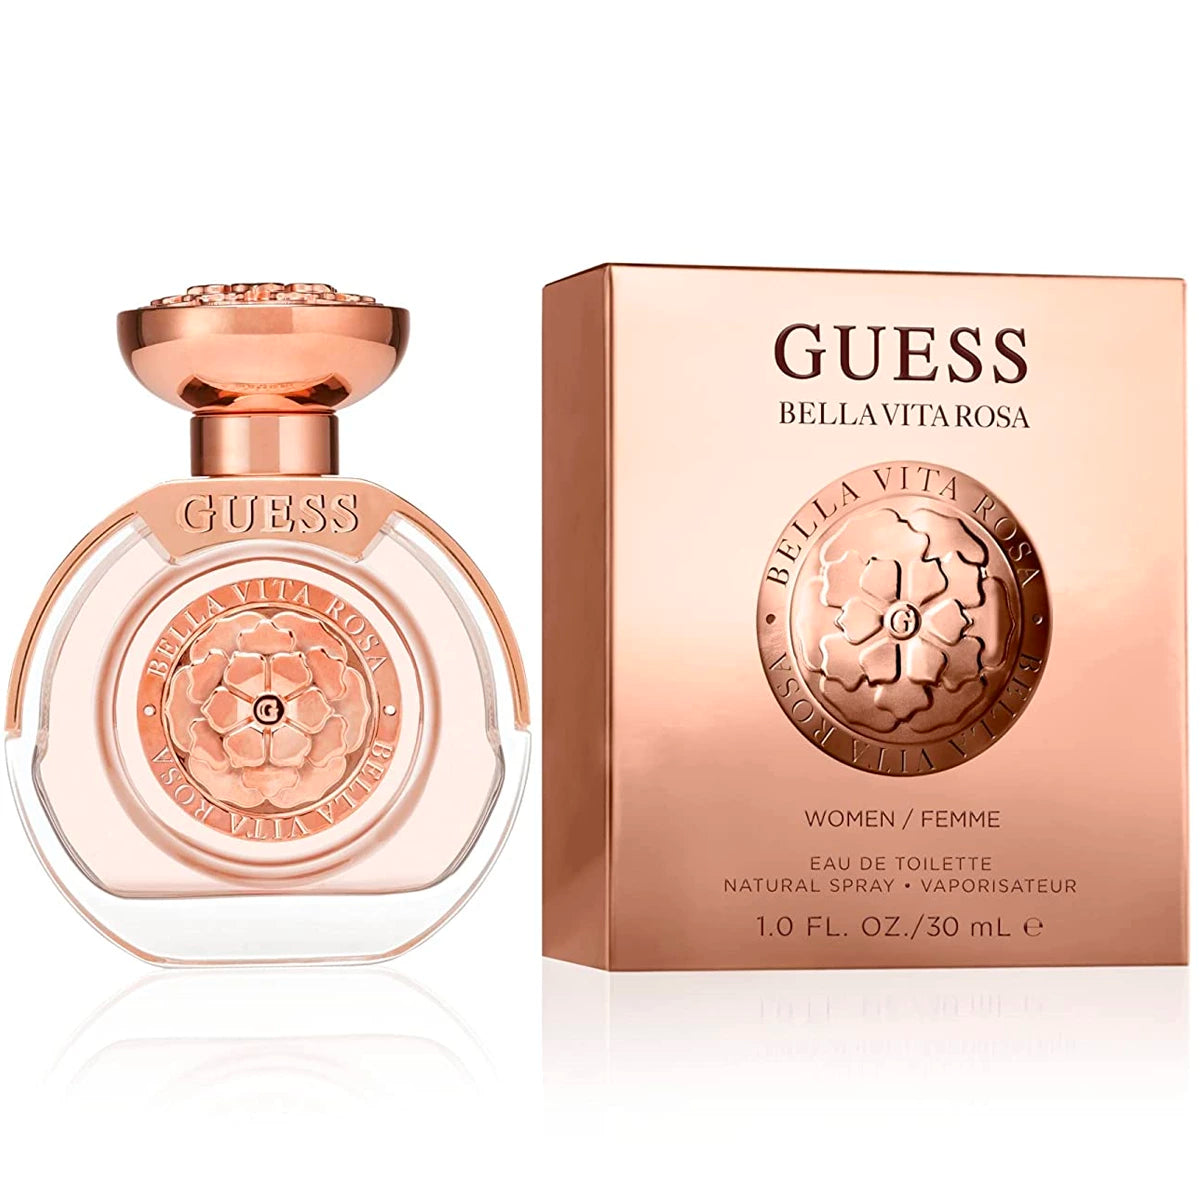 <h5 style="font-weight: 400;" data-mce-fragment="1" data-mce-style="font-weight: 400;">Bloom with GUESS Bella Vita Rosa. Its creamy citrus essence balances earthy floral notes, creating a fragrance where the woods meet a blossoming spring. With a dazzling combination of blackcurrent, magnolia and moss, this aromatic scent will take you back to those calming moments spent alongside wildflowers and mossy redwoods</h5>